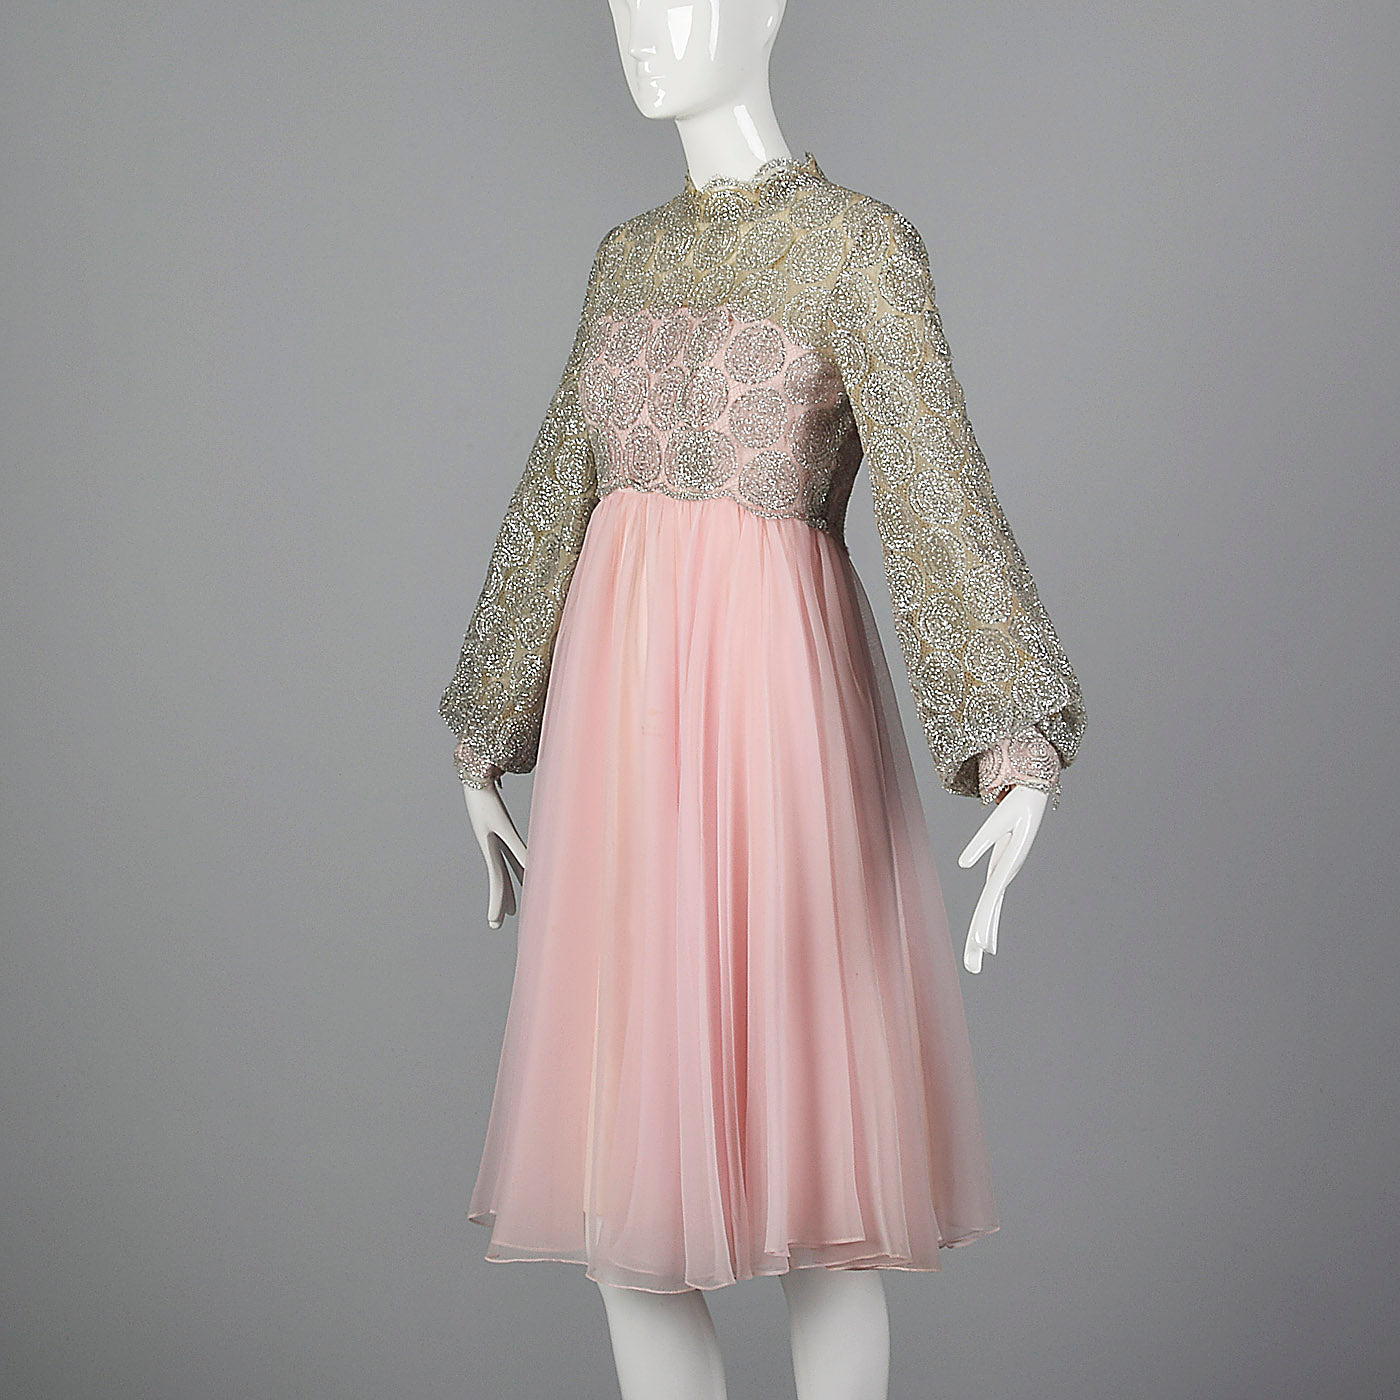 1960s Pink Dress with Silver Lace Overlay